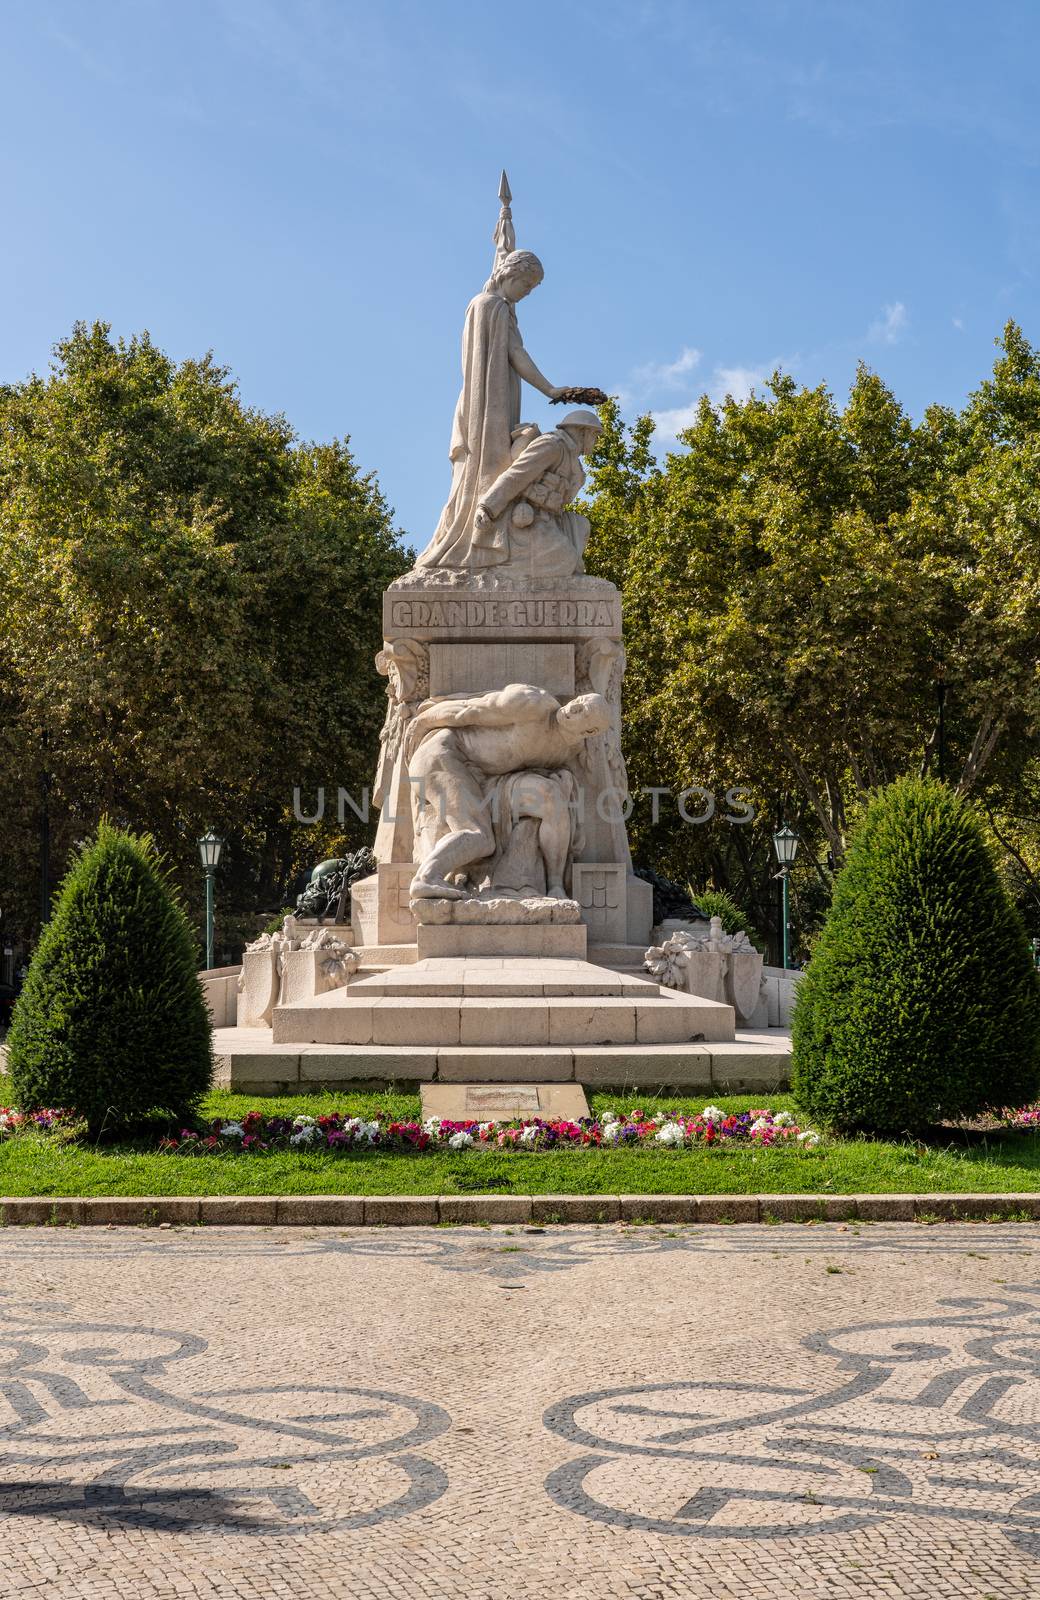 Monument to the dead of the Great War in Lisbon by steheap